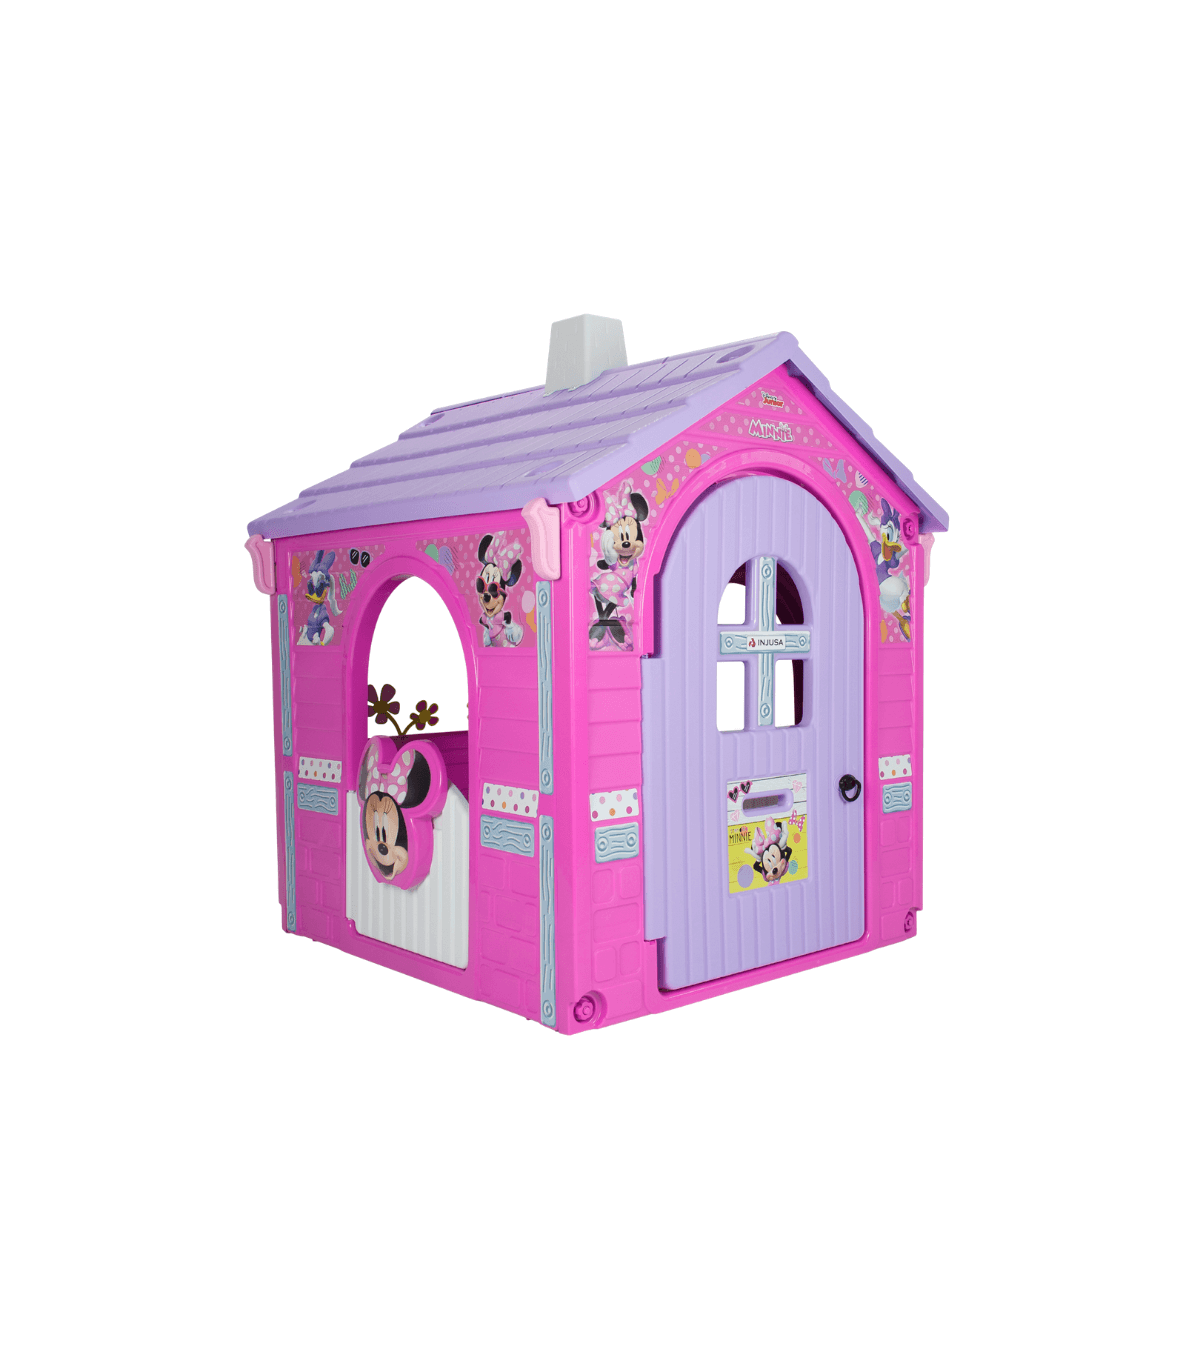 Minnie Mouse Toy House Colore Rosa